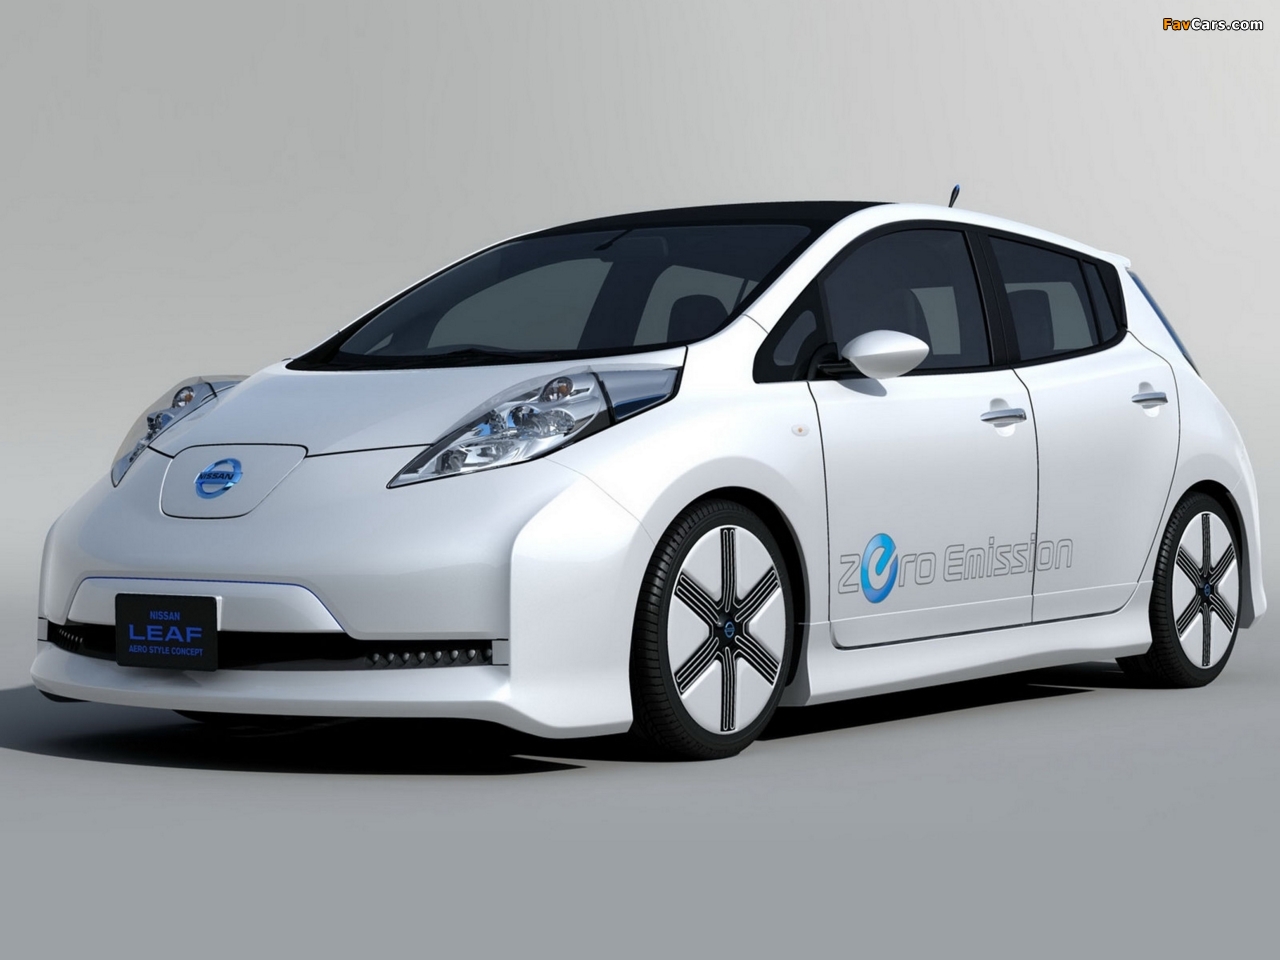 Nissan Leaf Aero Style Concept 2011 pictures (1280 x 960)